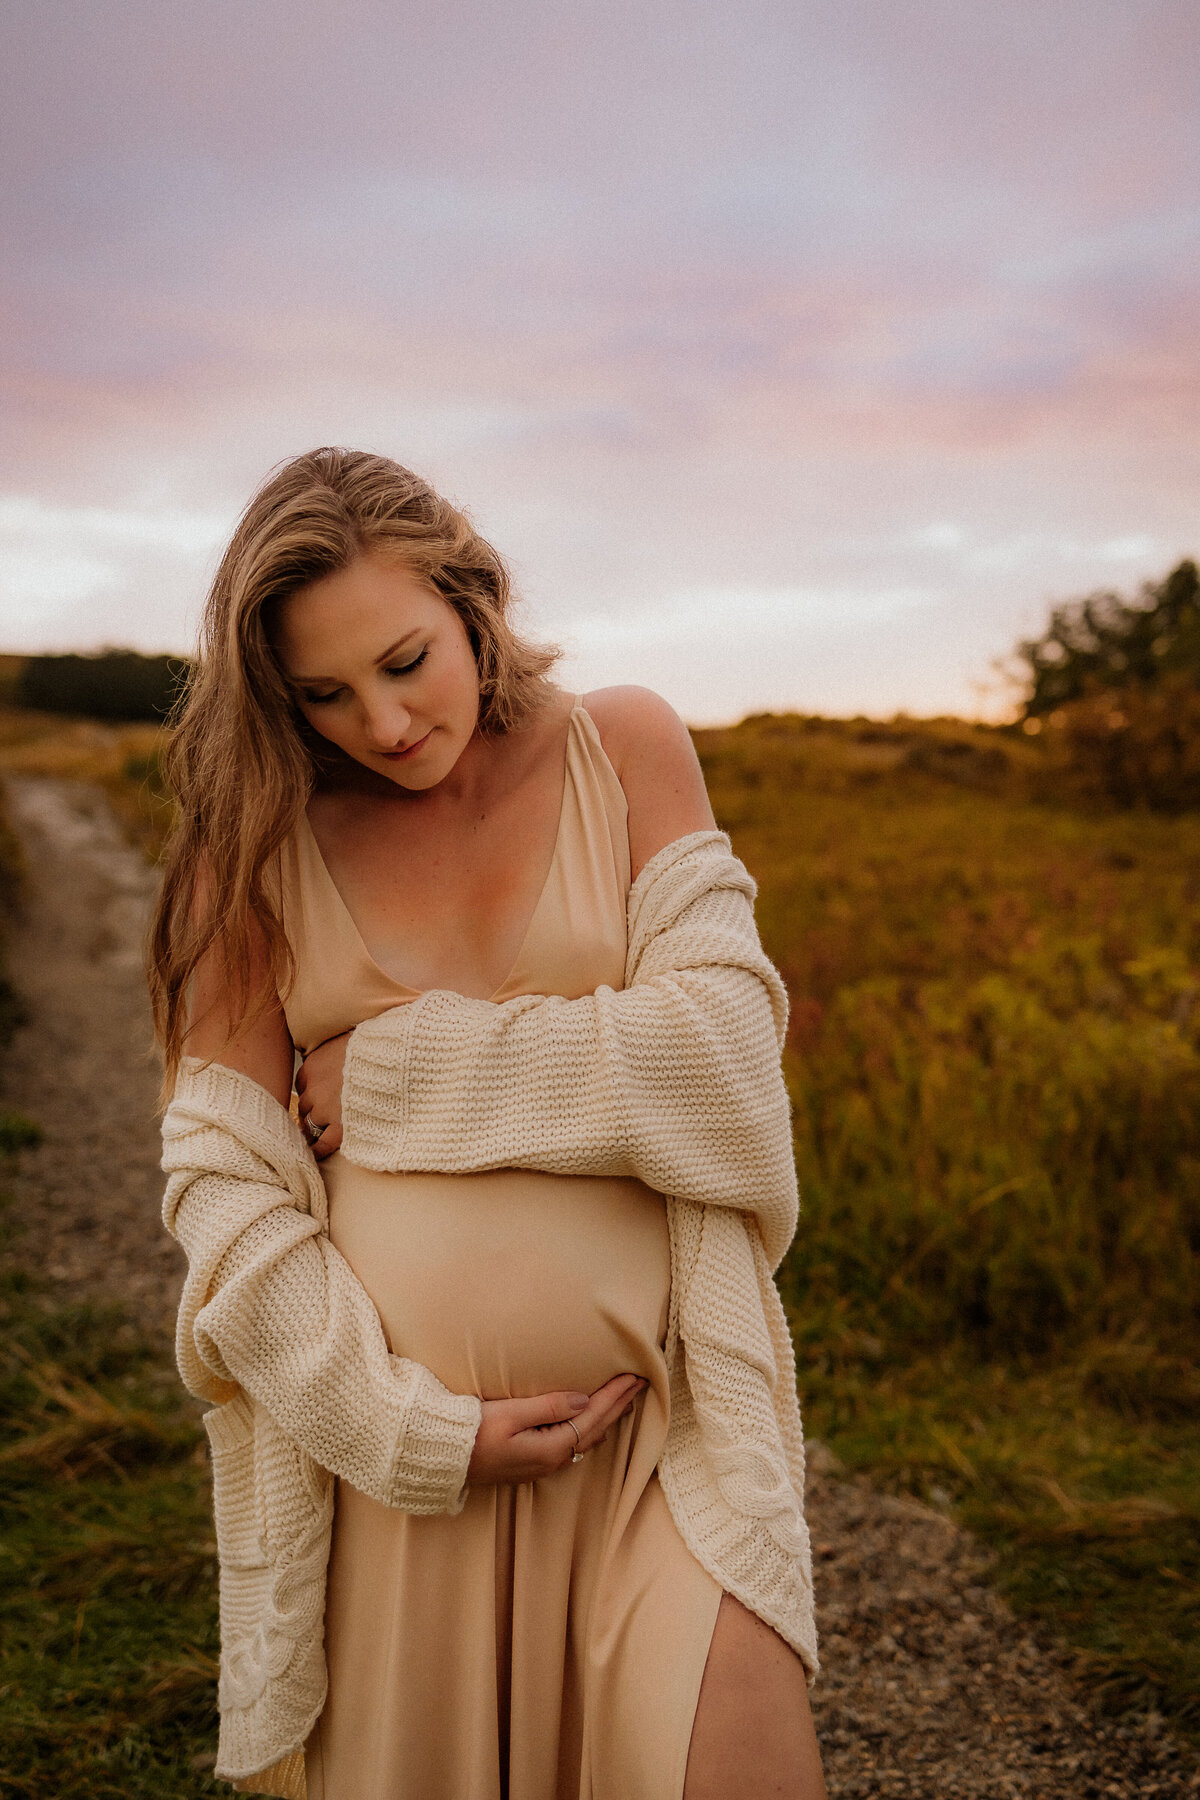 As a Calgary maternity photographer, I'm dedicated to preserving the joy of expecting parents. Join me in capturing the love, connection, and happiness of this time.